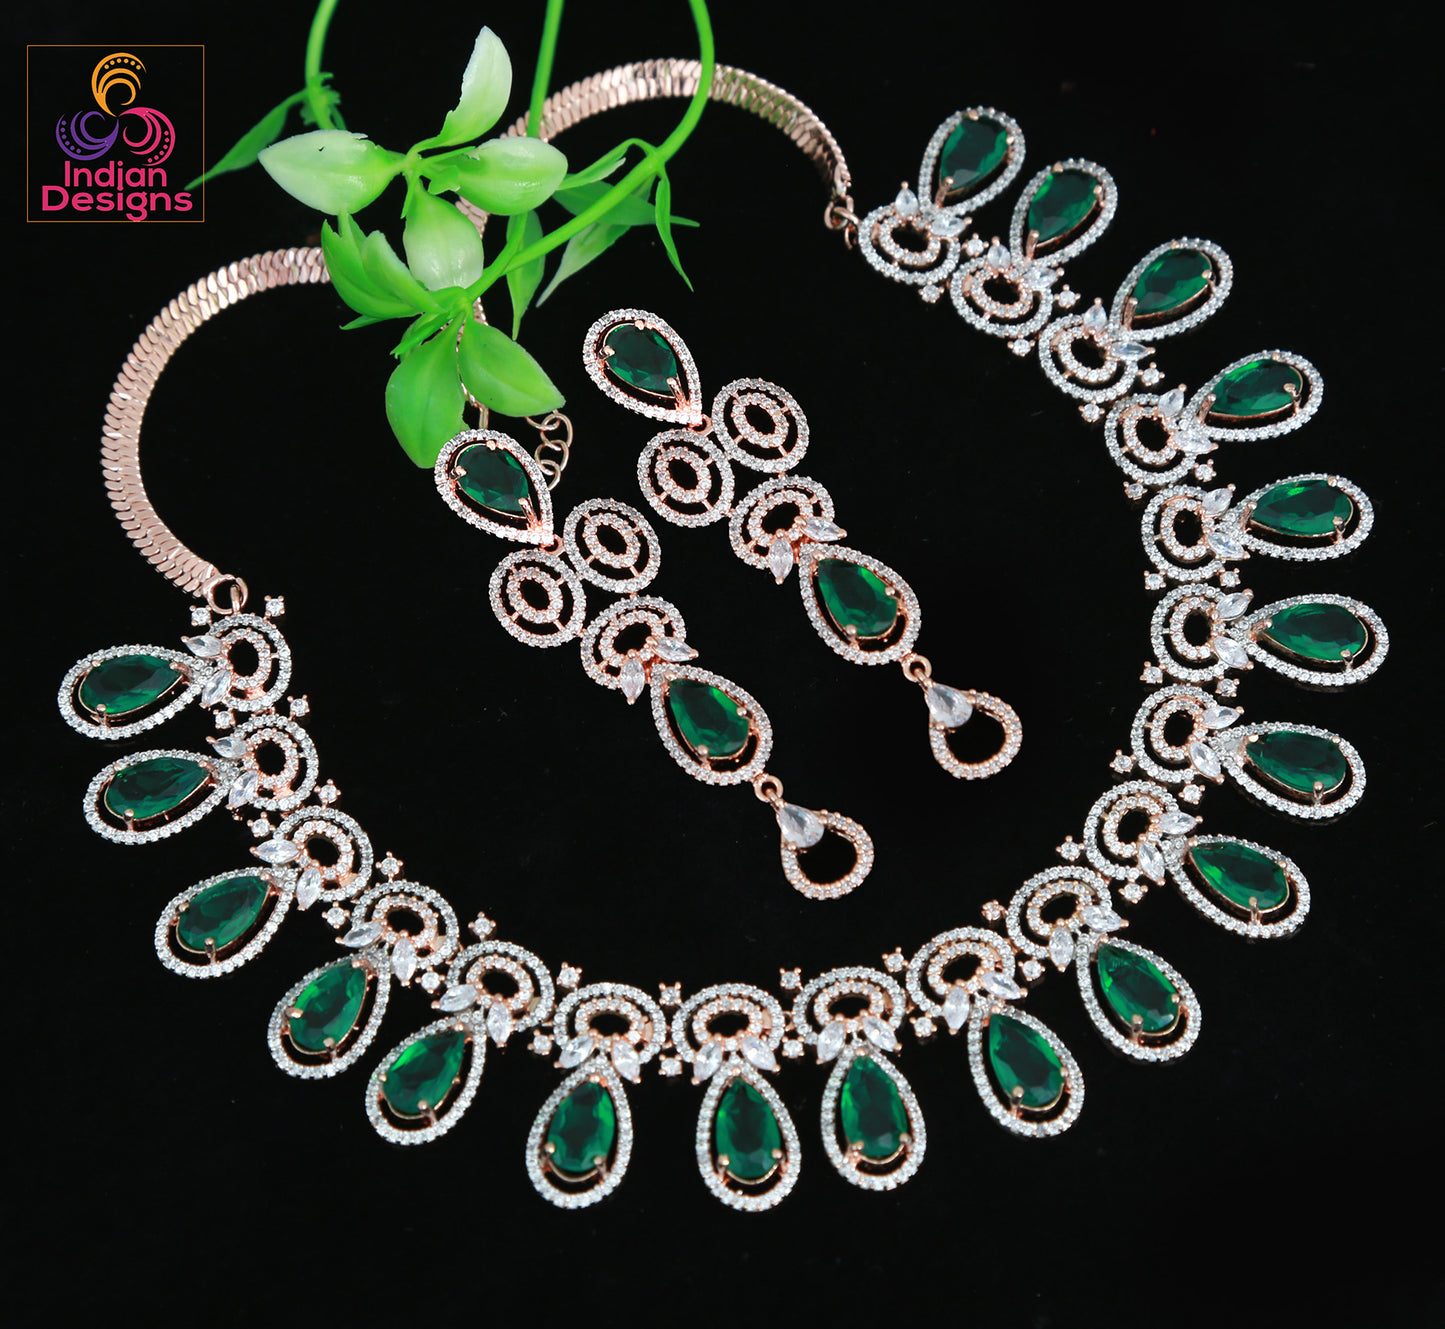 American Diamond Rose Gold Necklace | Indian Bollywood Wedding Bridal Jewelry | CZ Ad stone Necklace | Crystal mint green Statement necklace